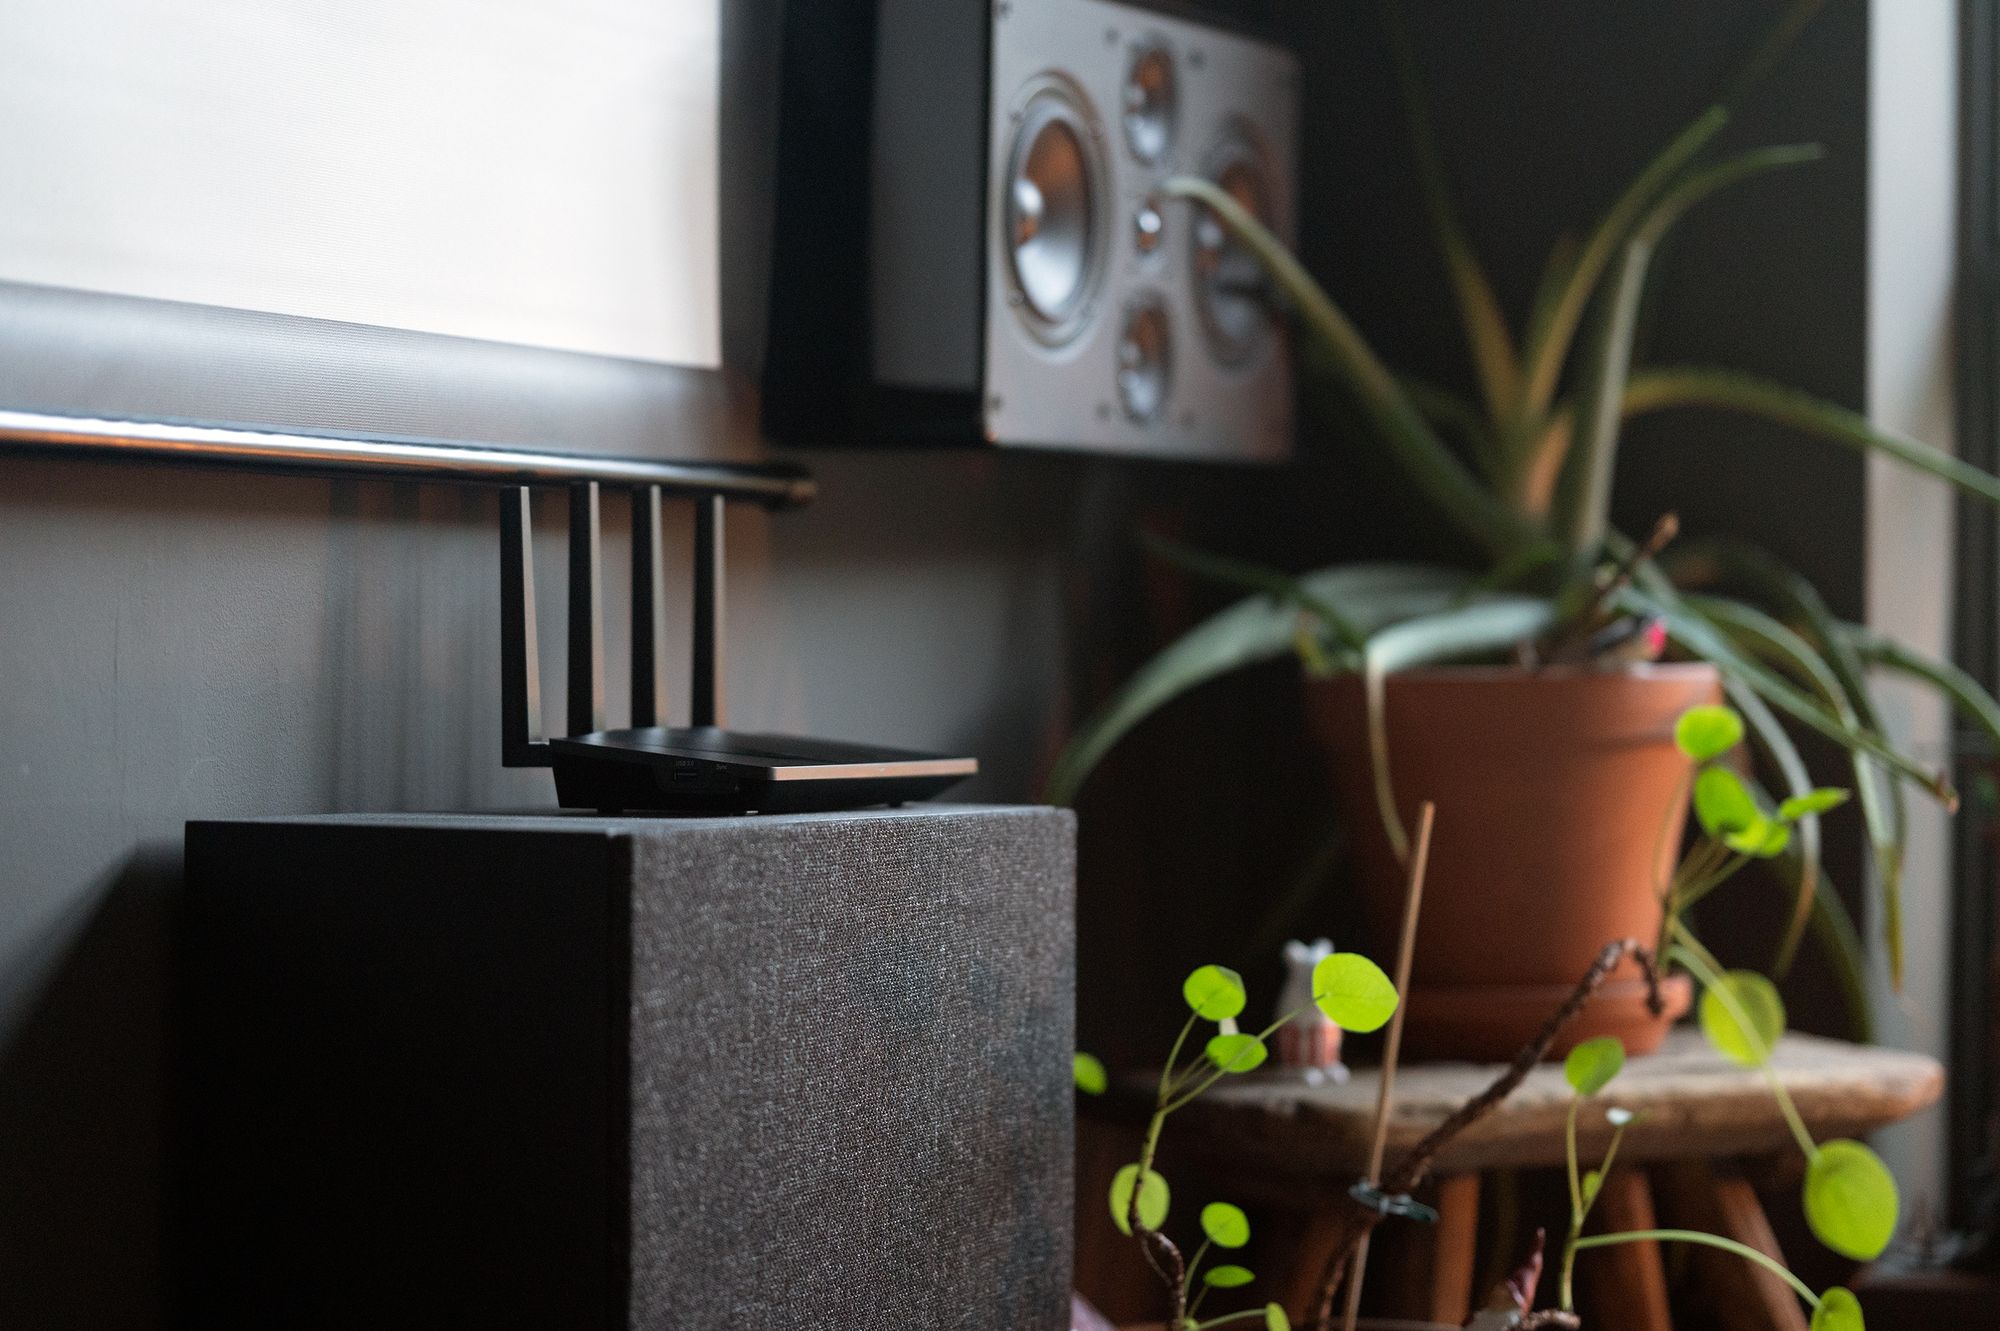 Encrouter sitting on top of a subwoofer in a living room with plants and a speaker system nearby.